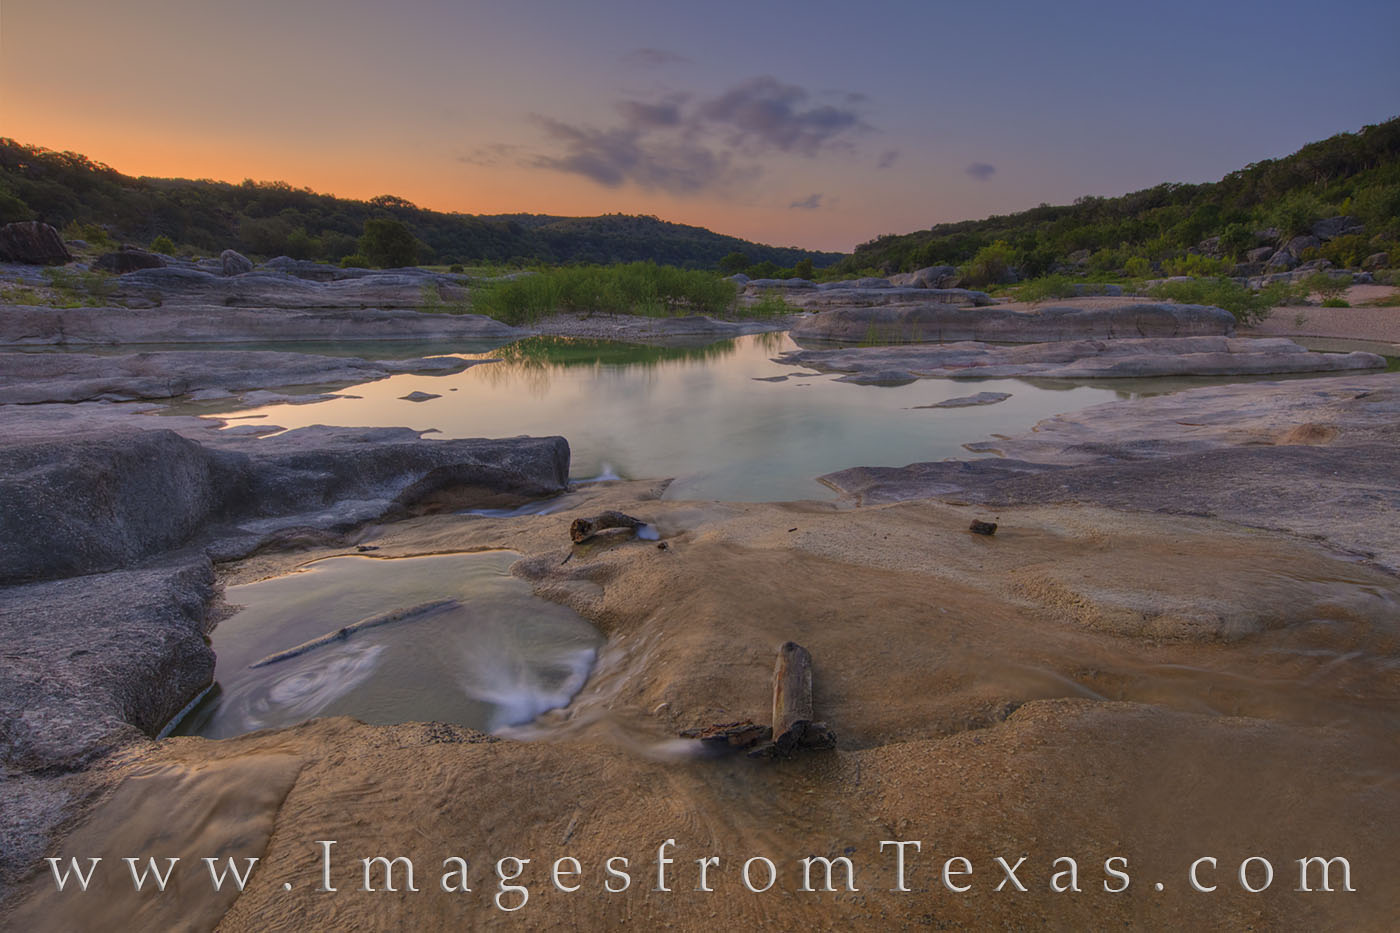 On a quiet August morning along the Pedernales River, low clouds drift by about 20 minutes before sunrise. The water was low -...